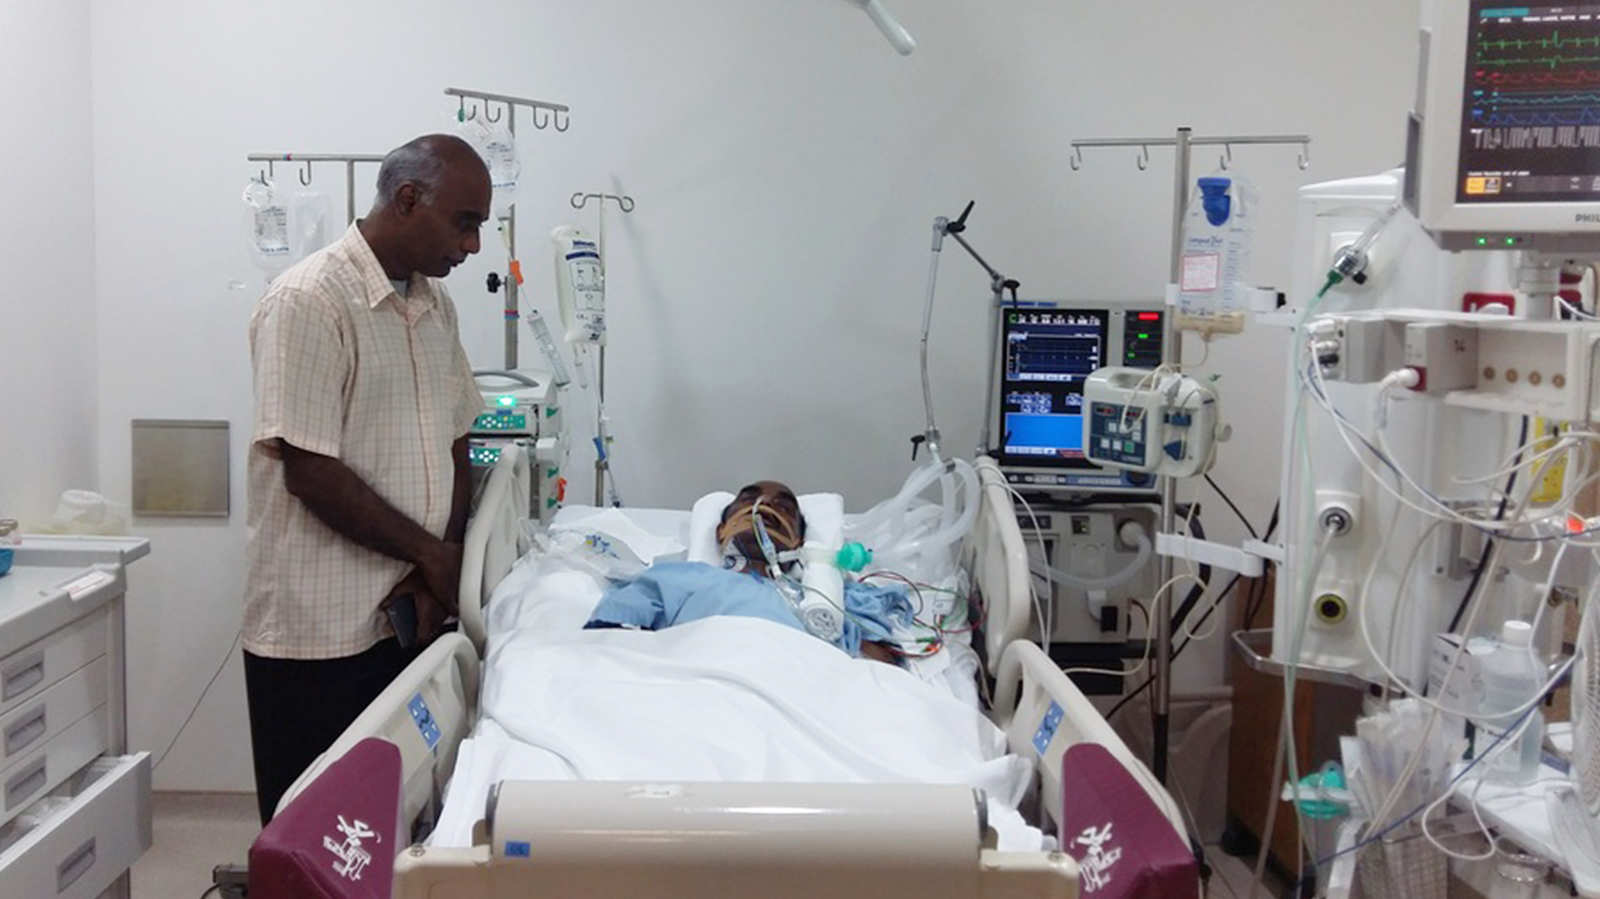 Hospital covers bill of its security guard who suffers a heart attack